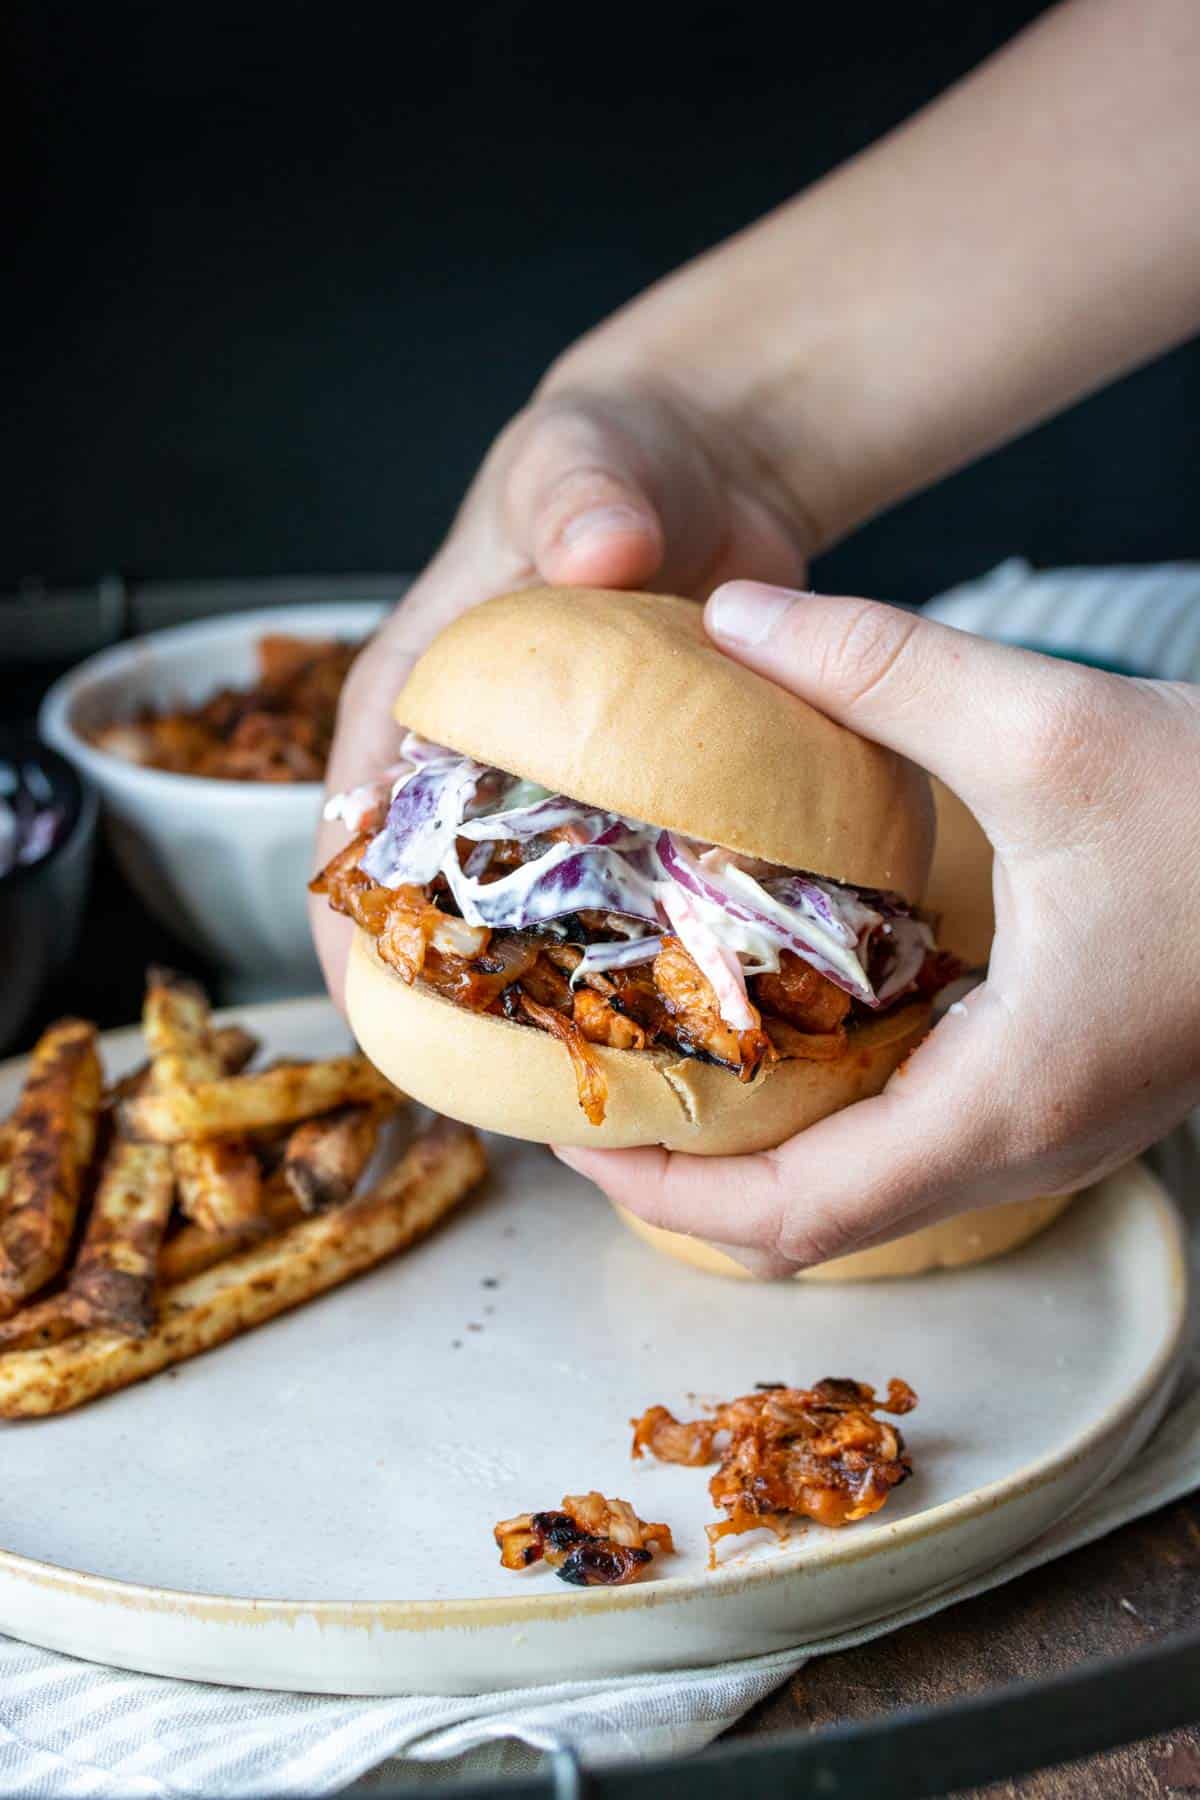 Hands picking up a BBQ jackfruit sandwich topped with coleslaw off a plate